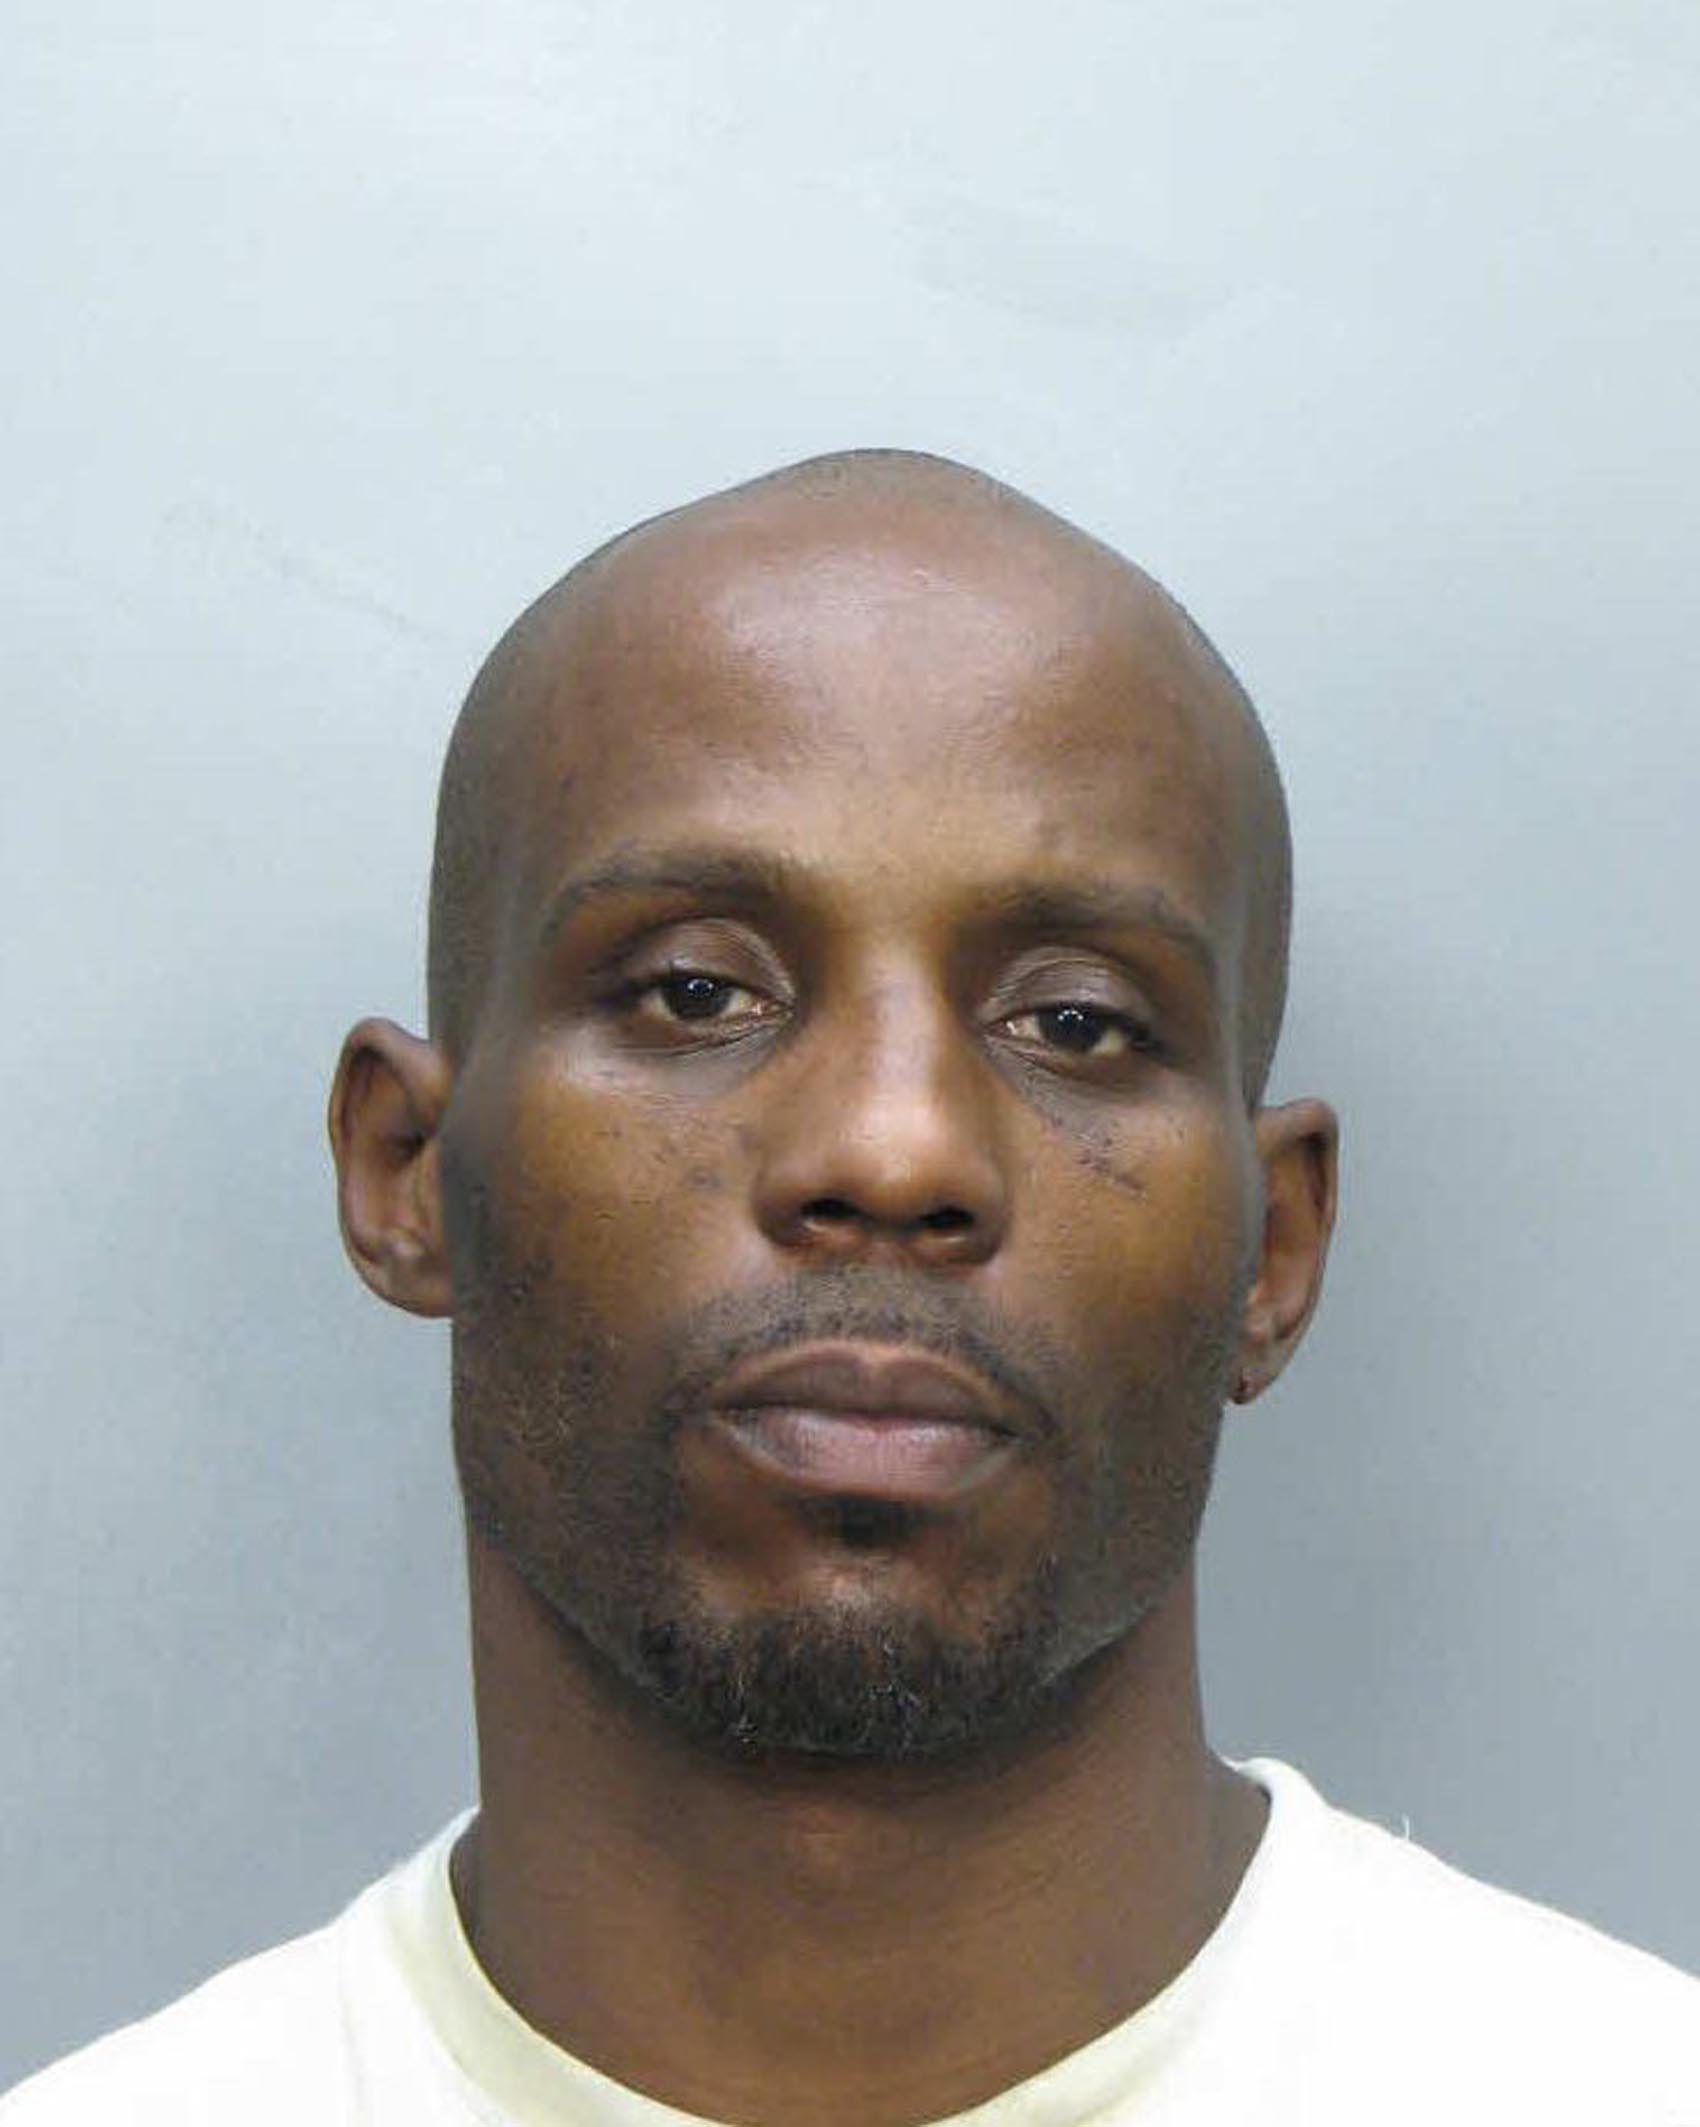 Rapper DMX (<b>Earl Simmons</b>) has received a sentence of 90 days in jail for ... - spl66623_001